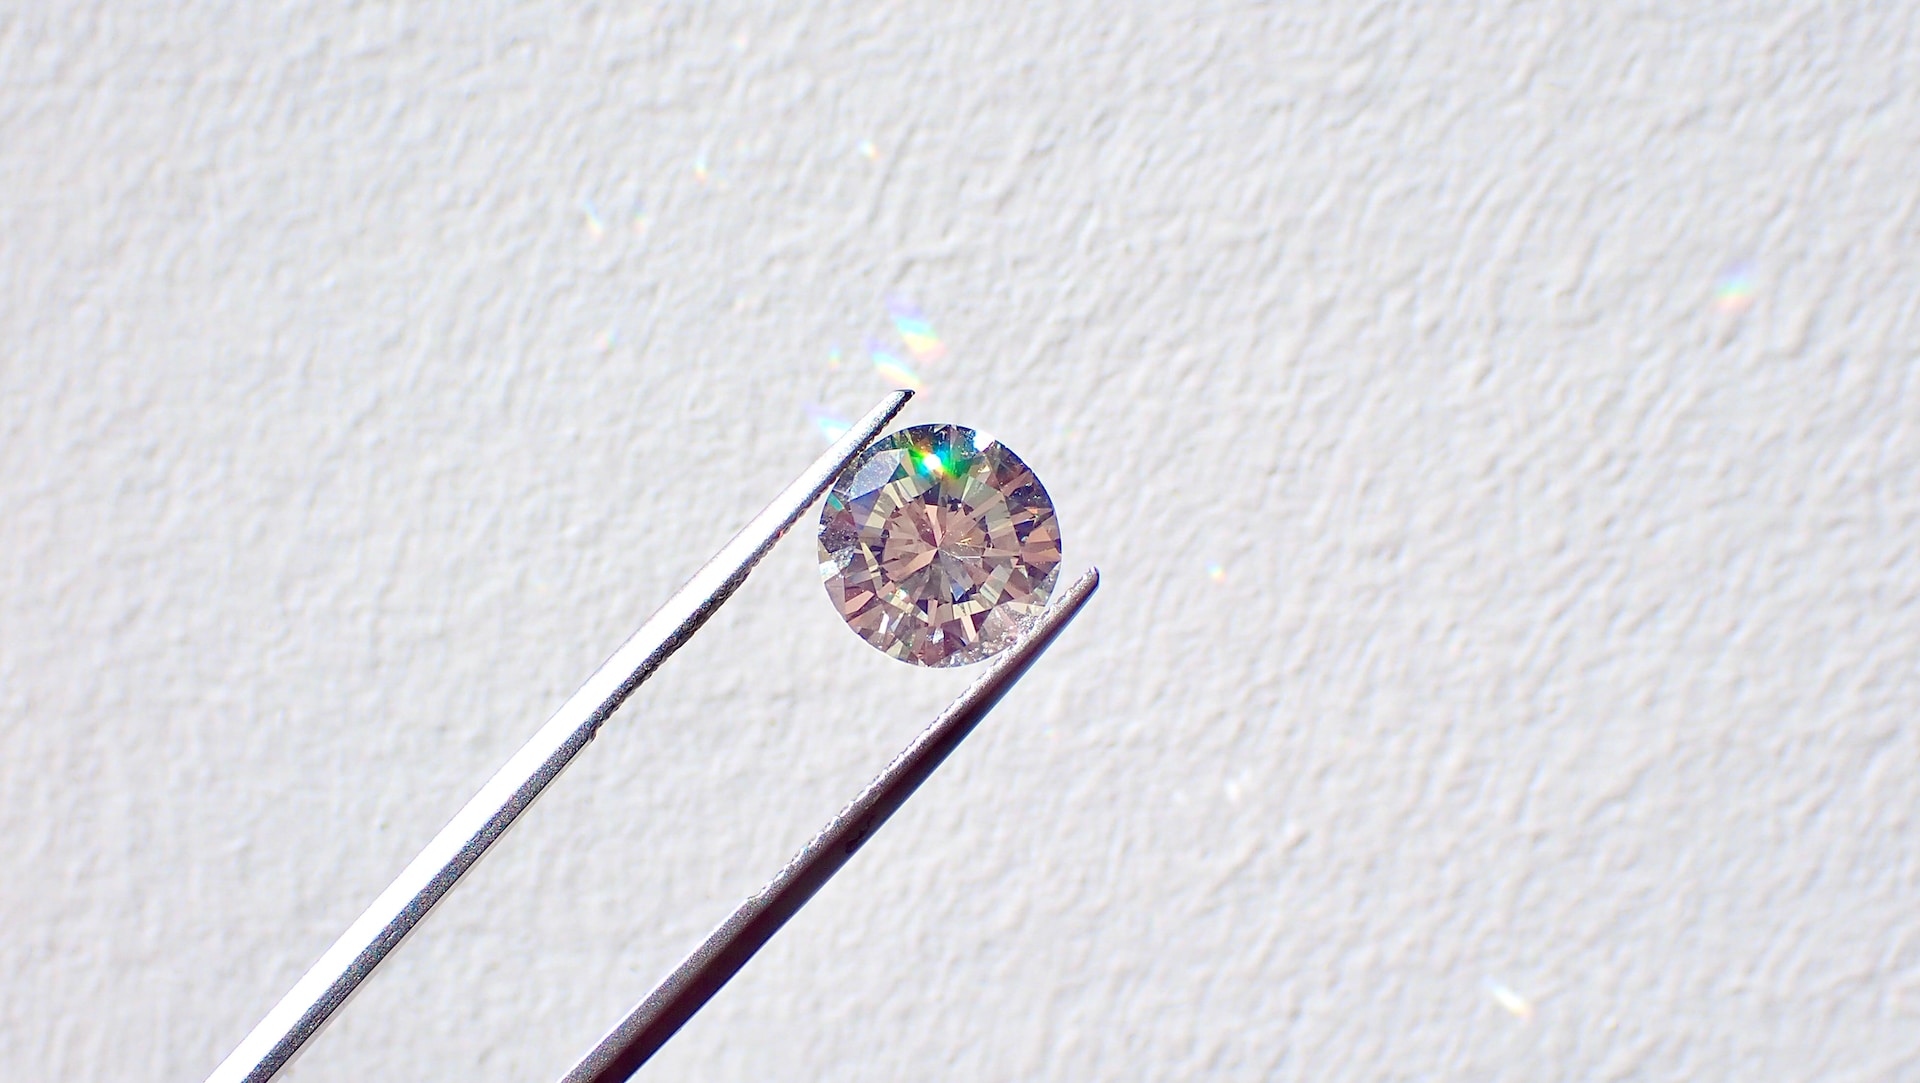 a round cut diamond being held in a pair of tweezers against a white background